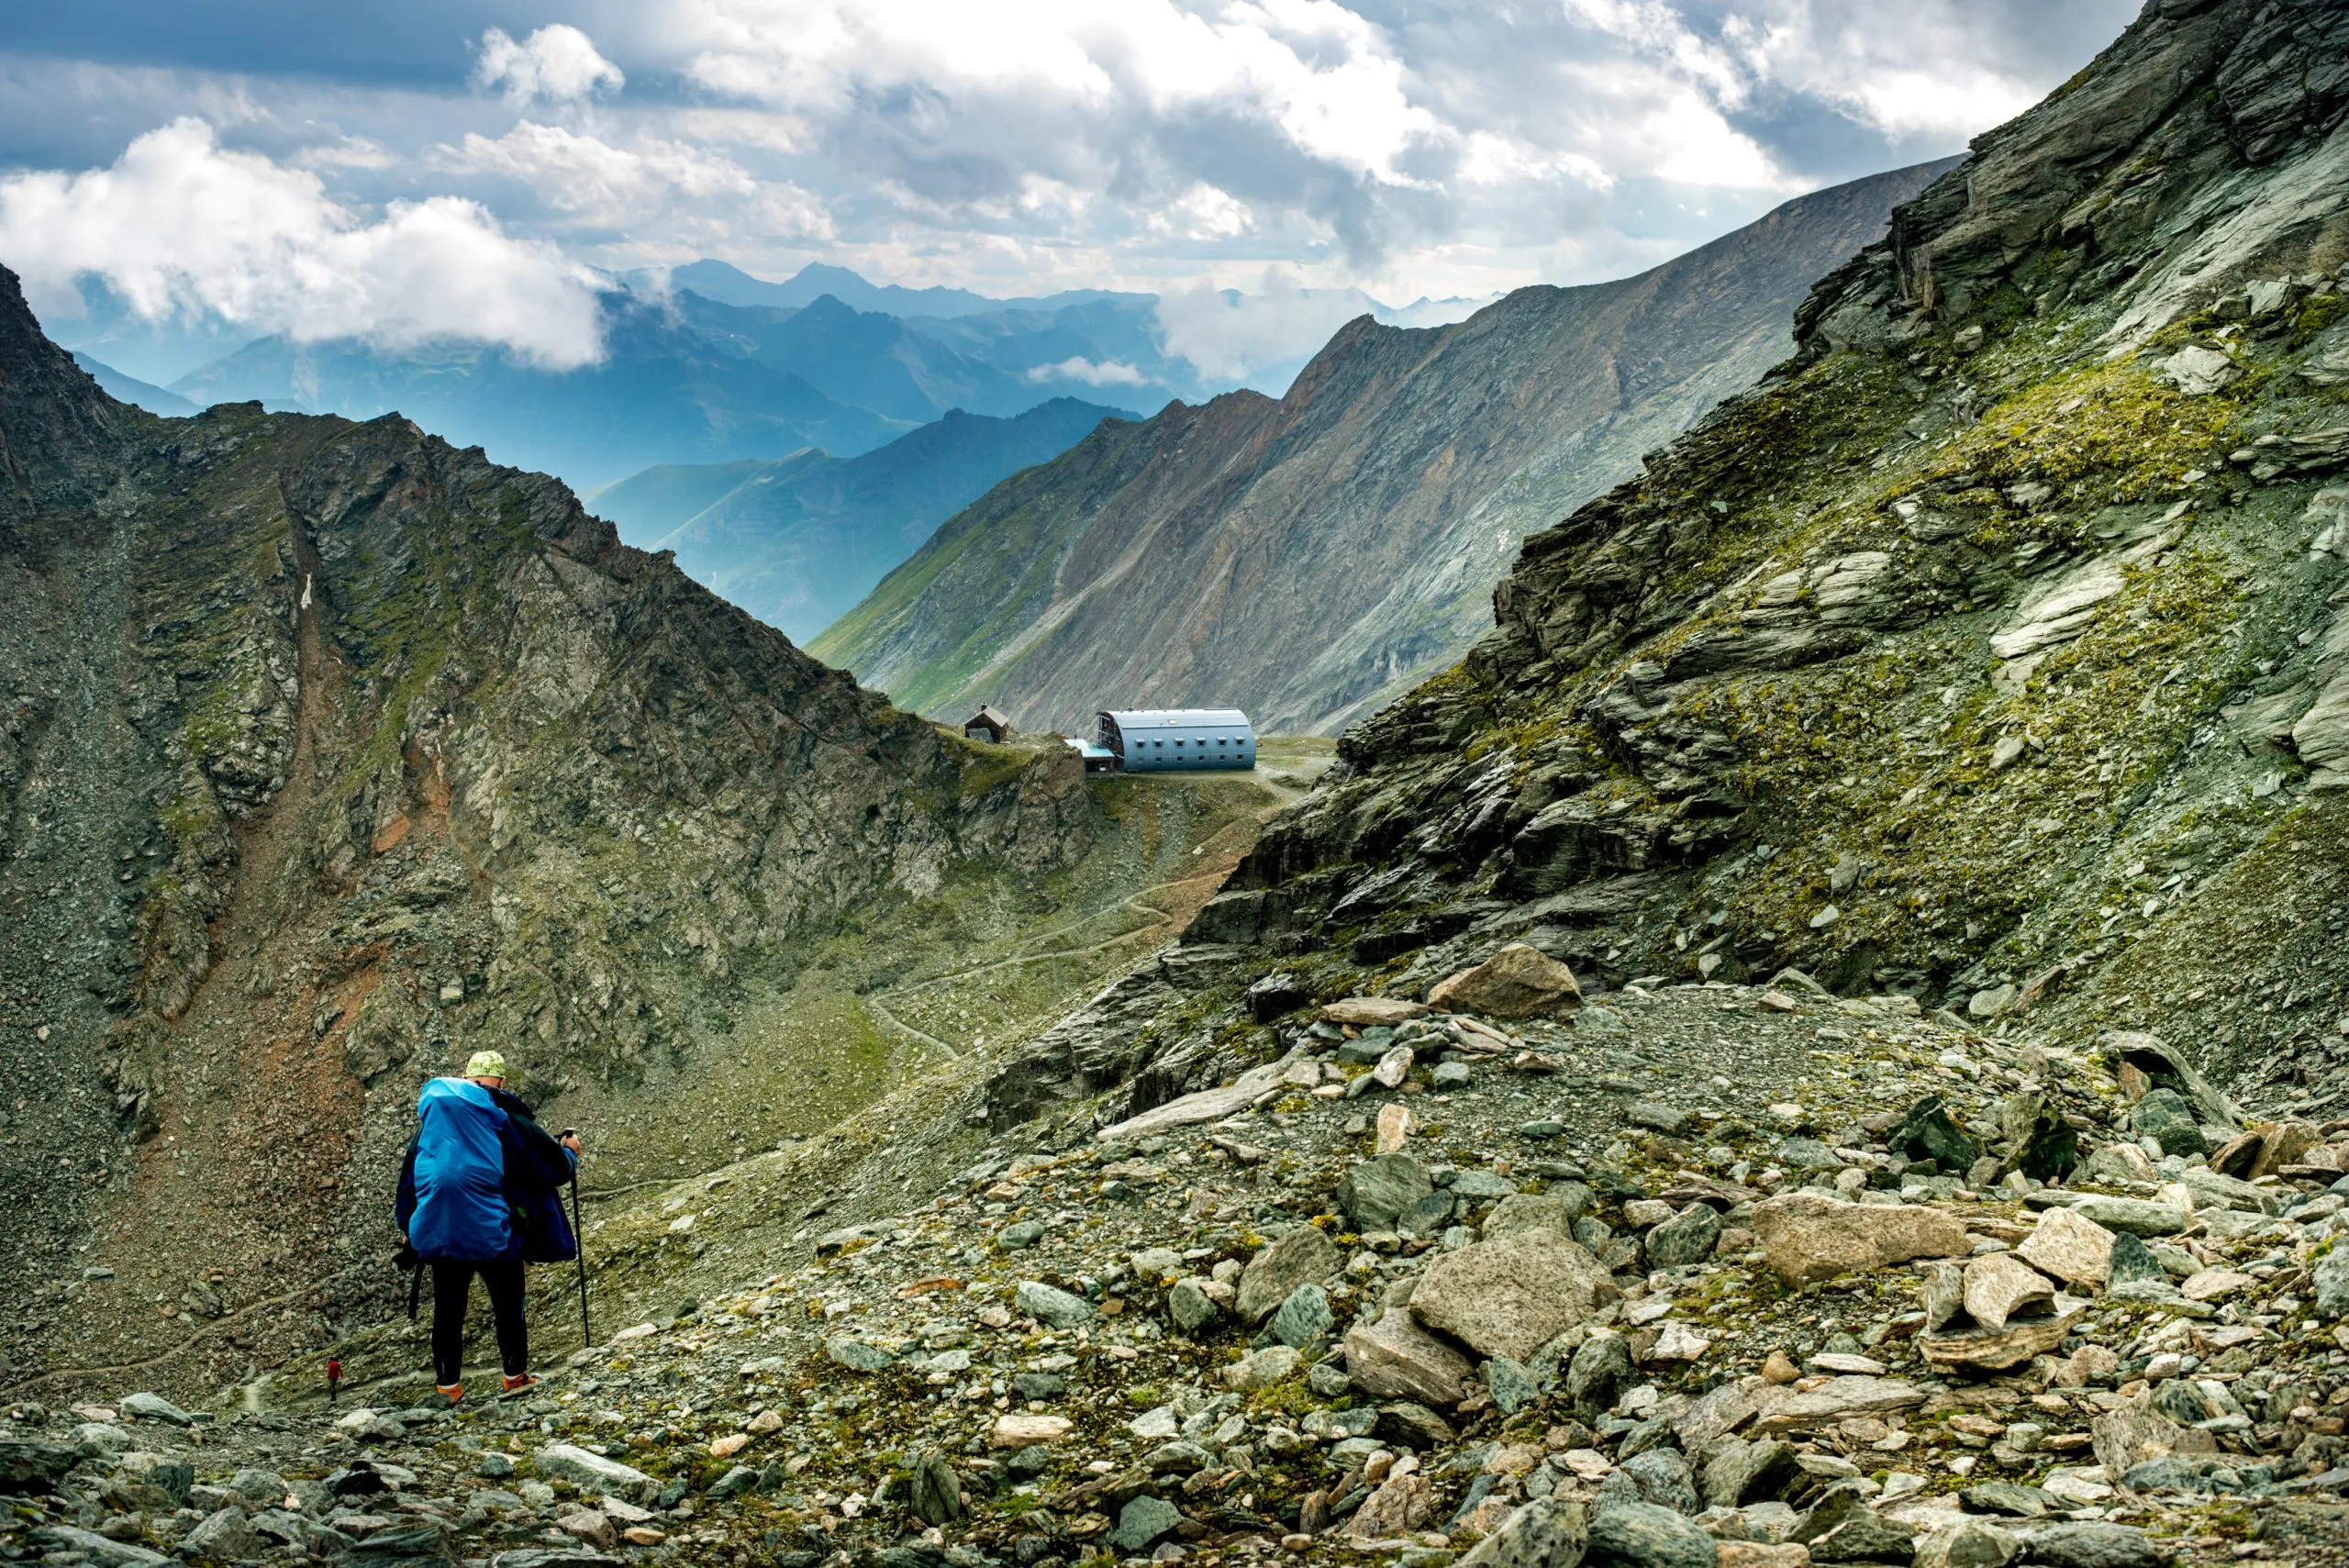 Traverse rugged trails to unforgettable moments